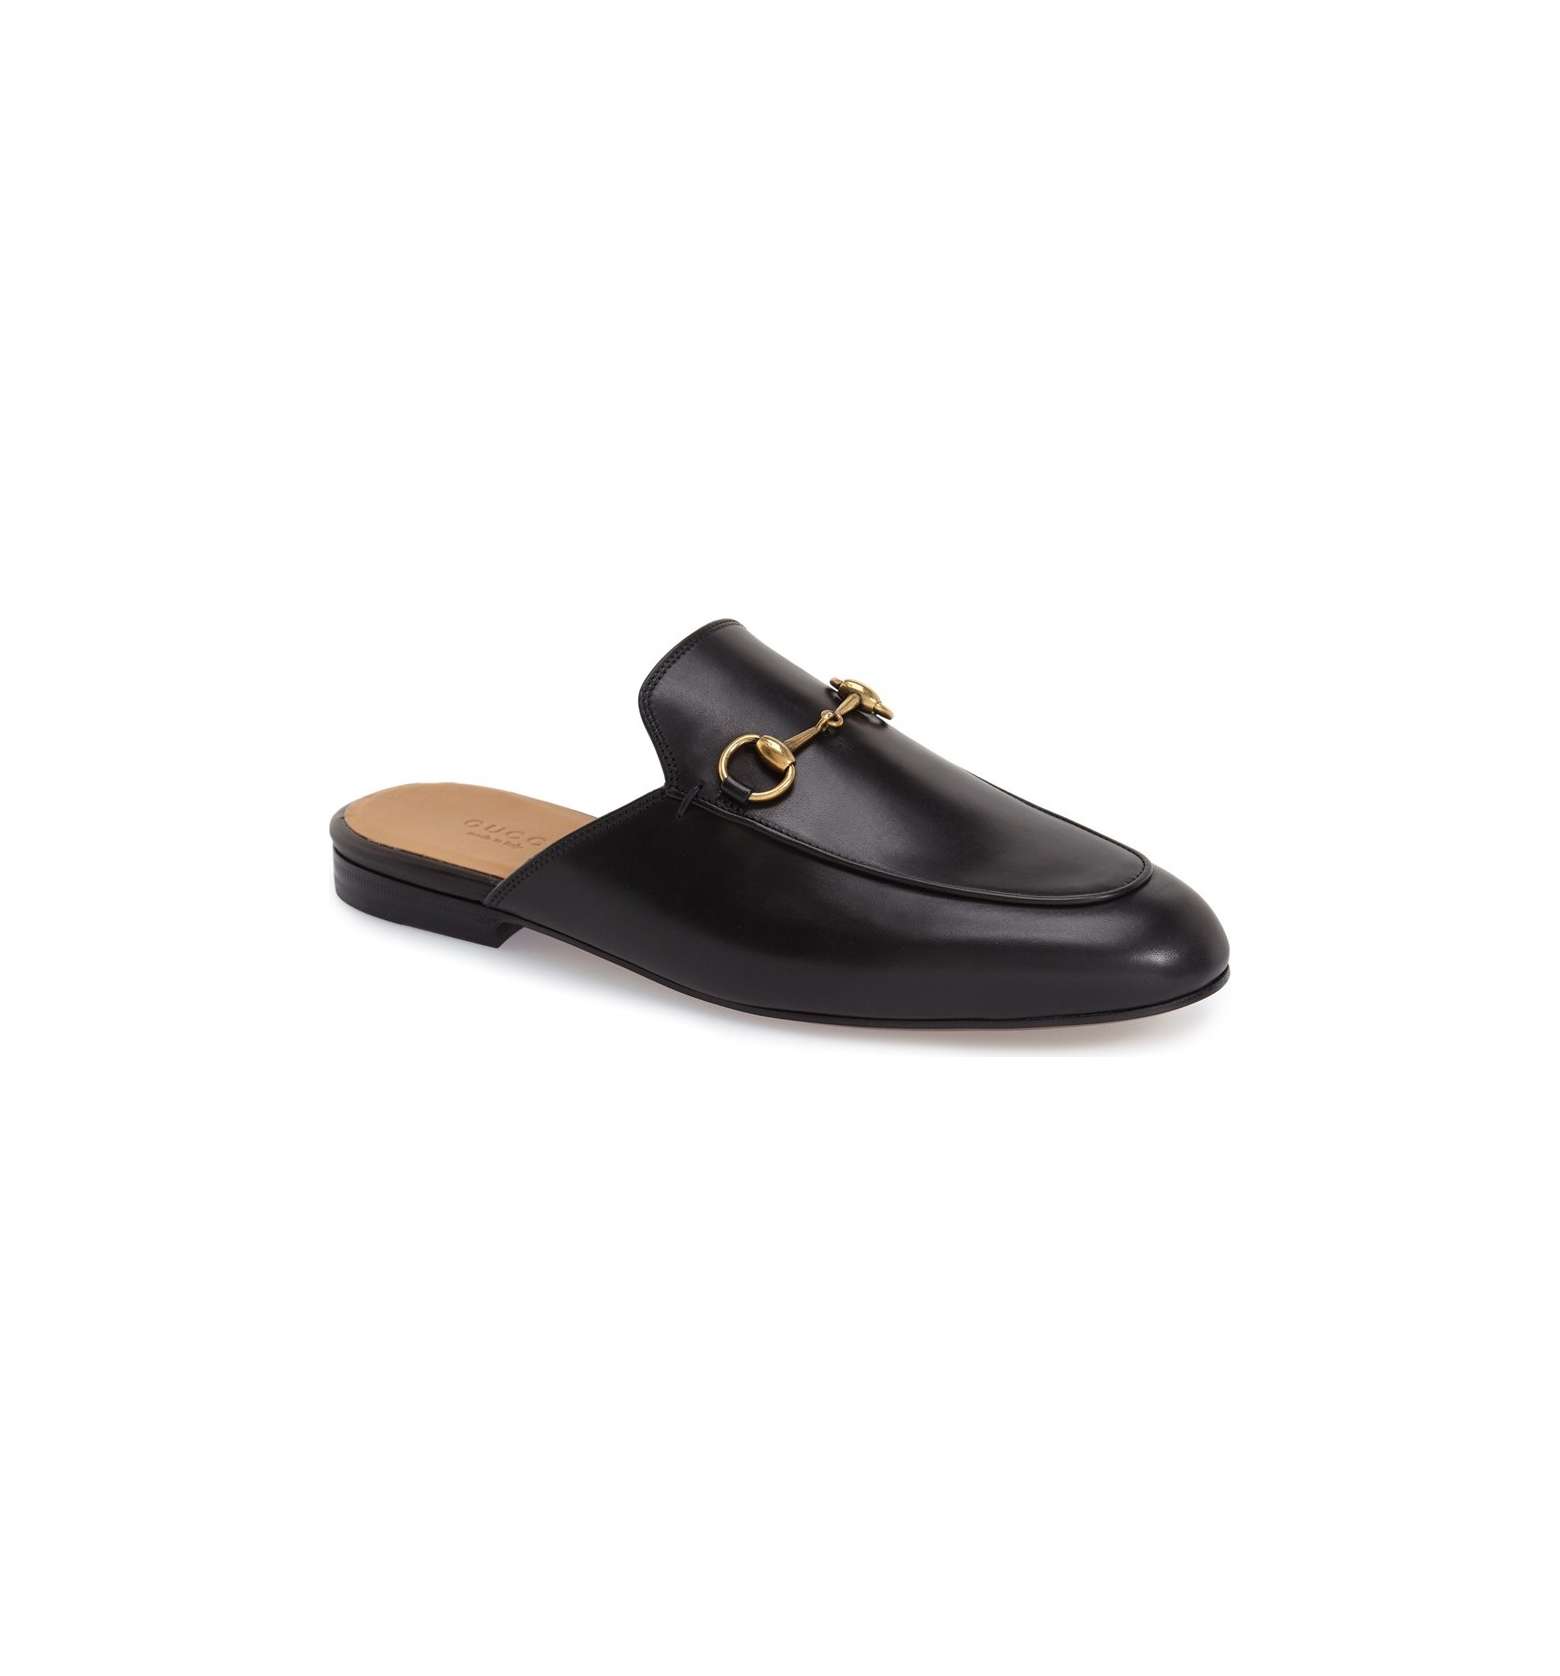 Gucci Princetown Loafer Mule Style Apotheca